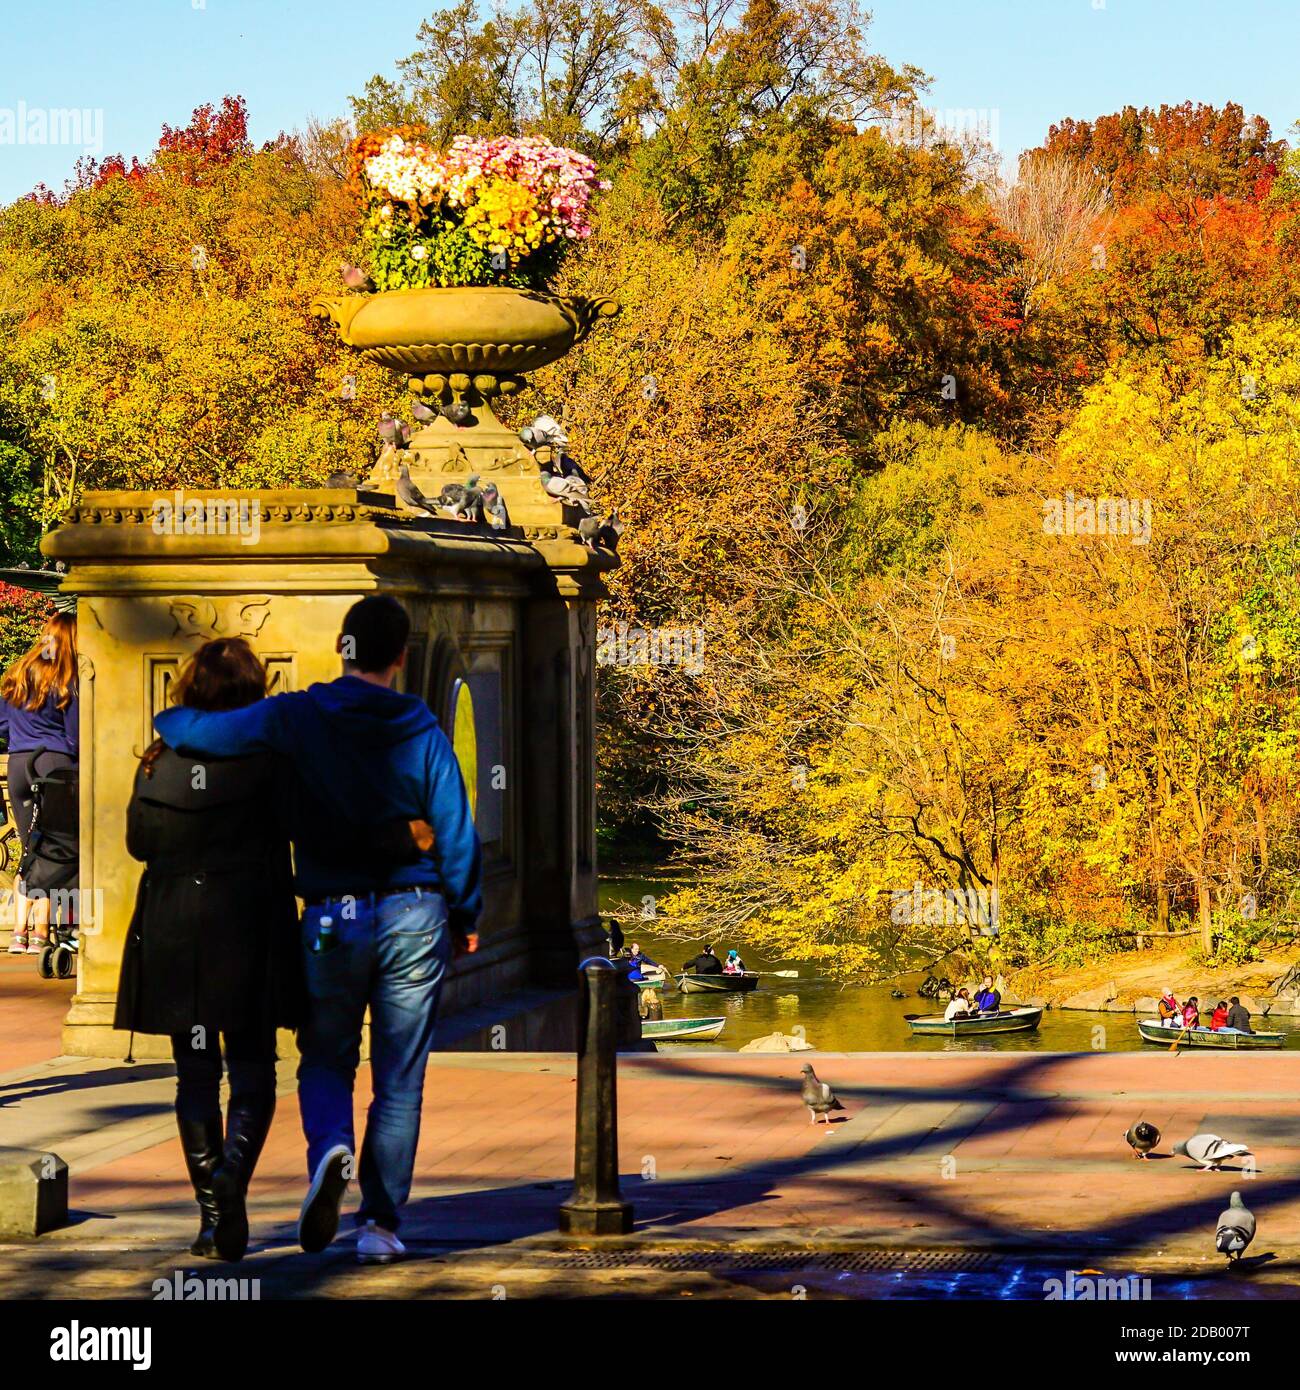 Nothing like a crisp autumn day at Bethesda Fountain